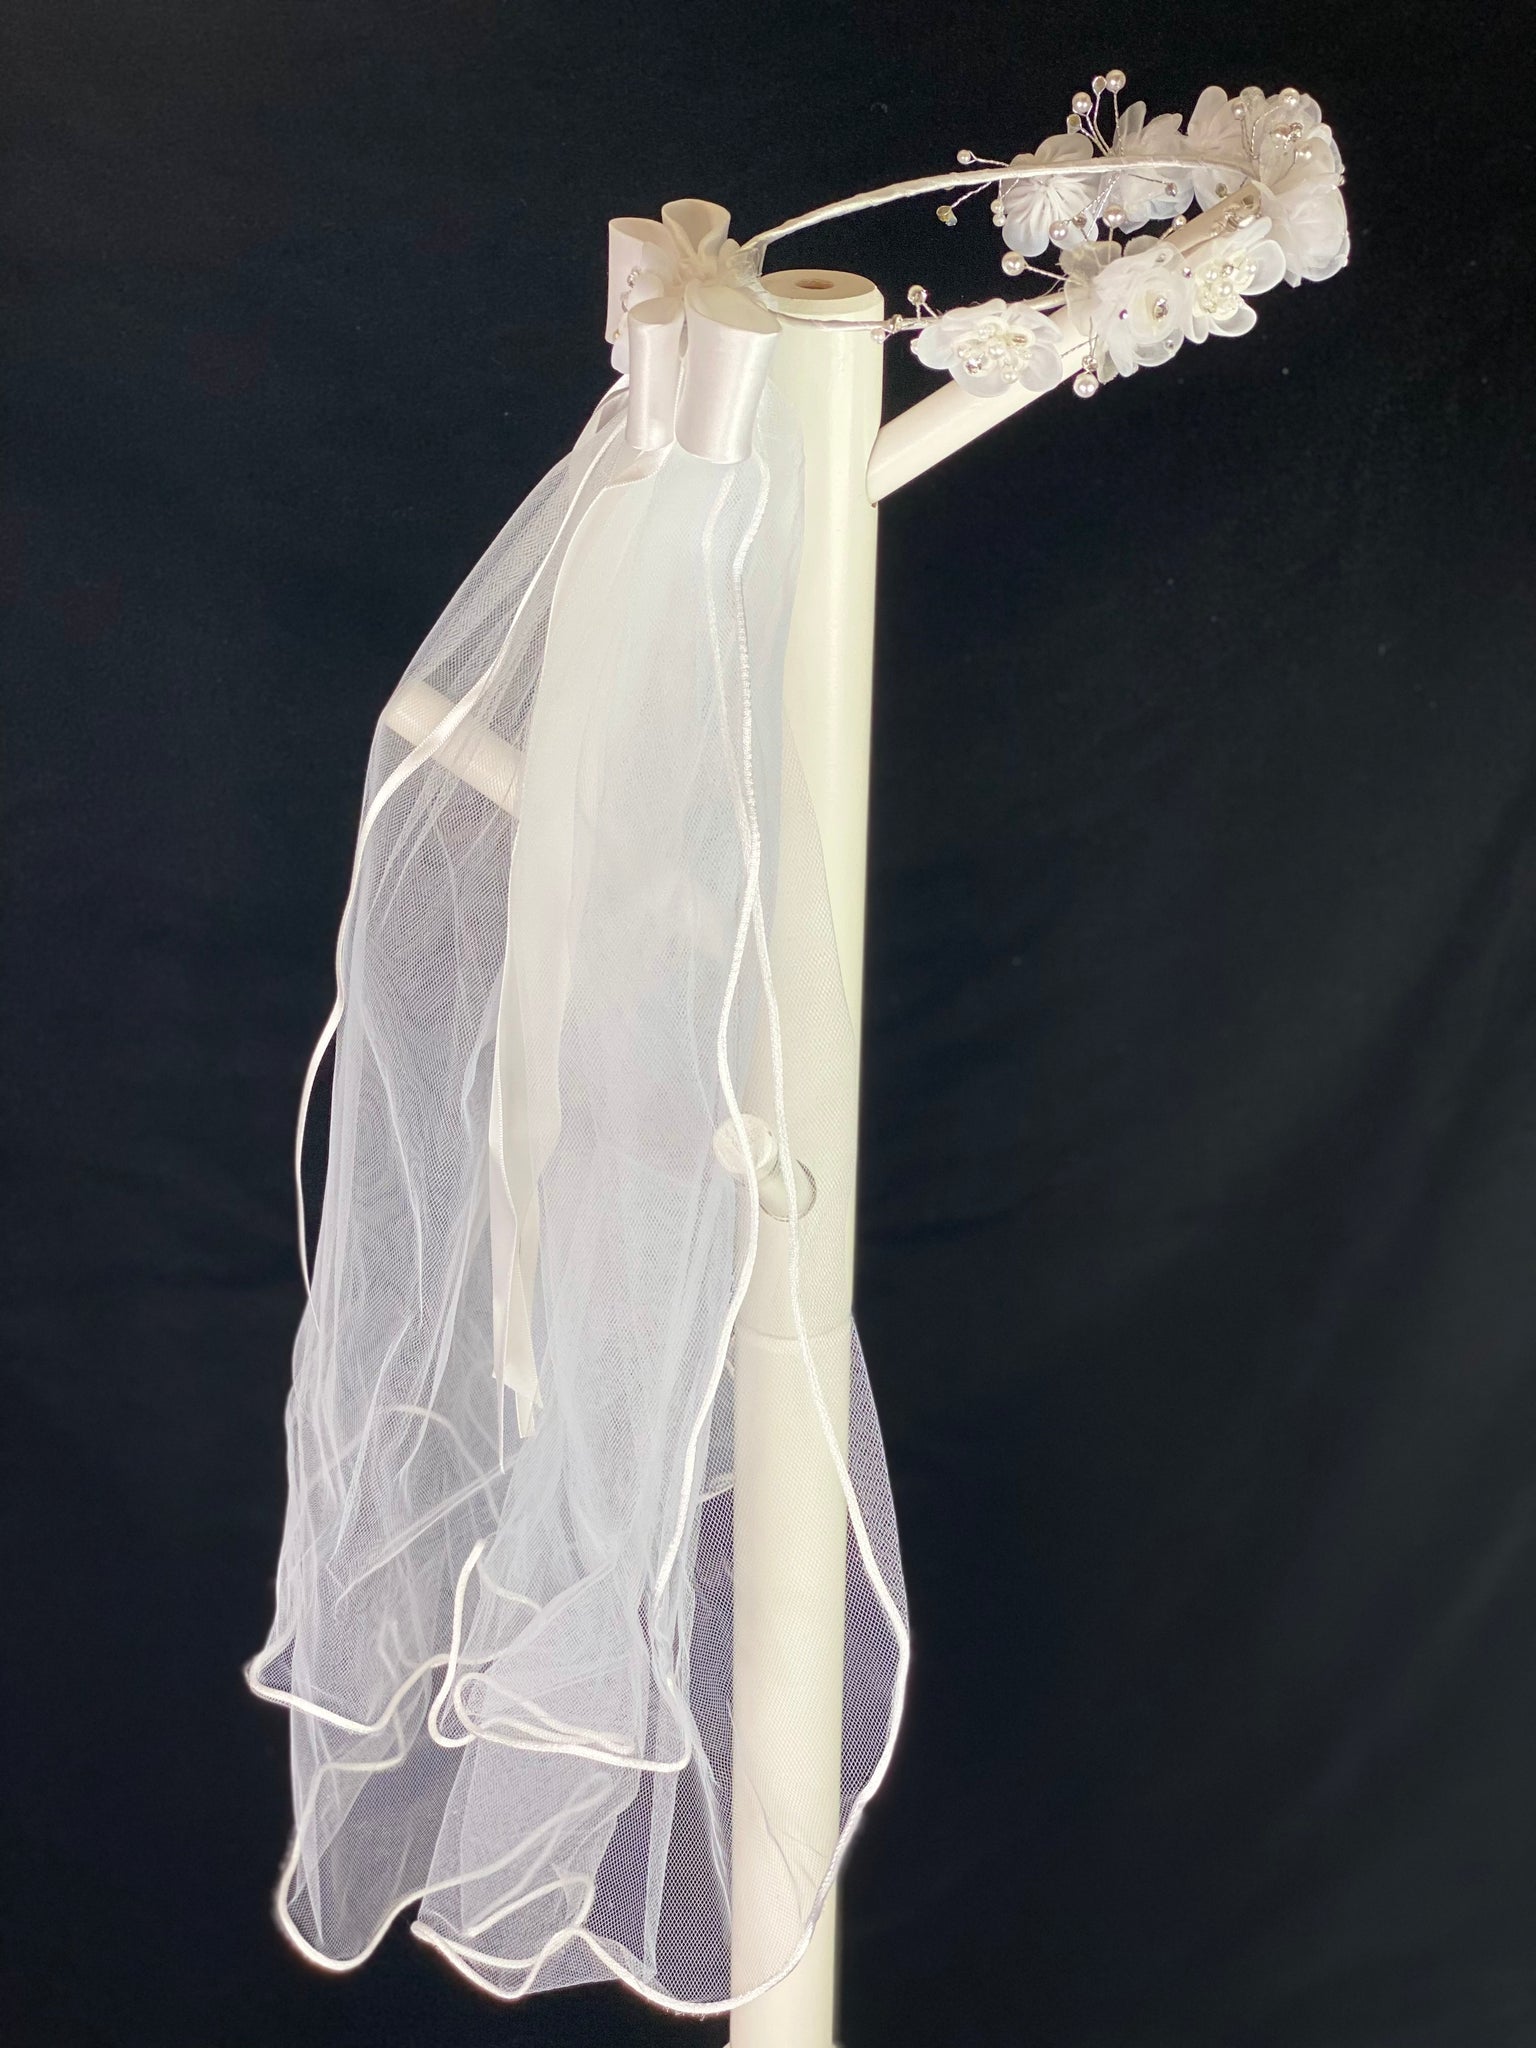 Elegant soft 2 layer tulle veil with delicate hand stitched braided satin trim around the edge and handmade flower halo crown with veil with large white satin bow on back. Organza flowers with sparkling rhinestone petals and centers. Beautiful pearl leaves sticking out around flowers.  This double layered veil reaches approximately 24" long, with a crown diameter of 6". Veil has 2" long, 3" wide, comb to secure it in place. 